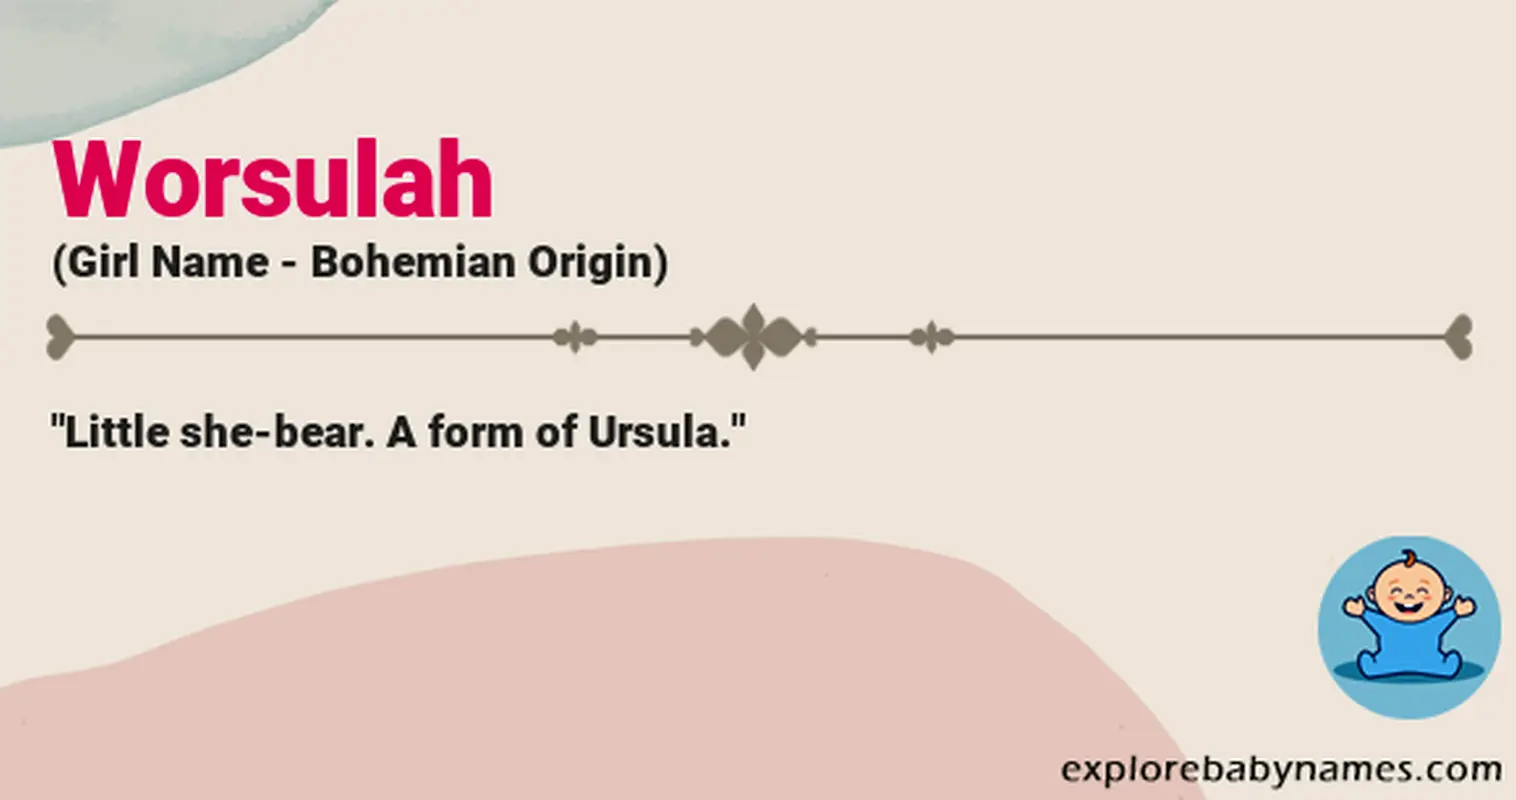 Meaning of Worsulah